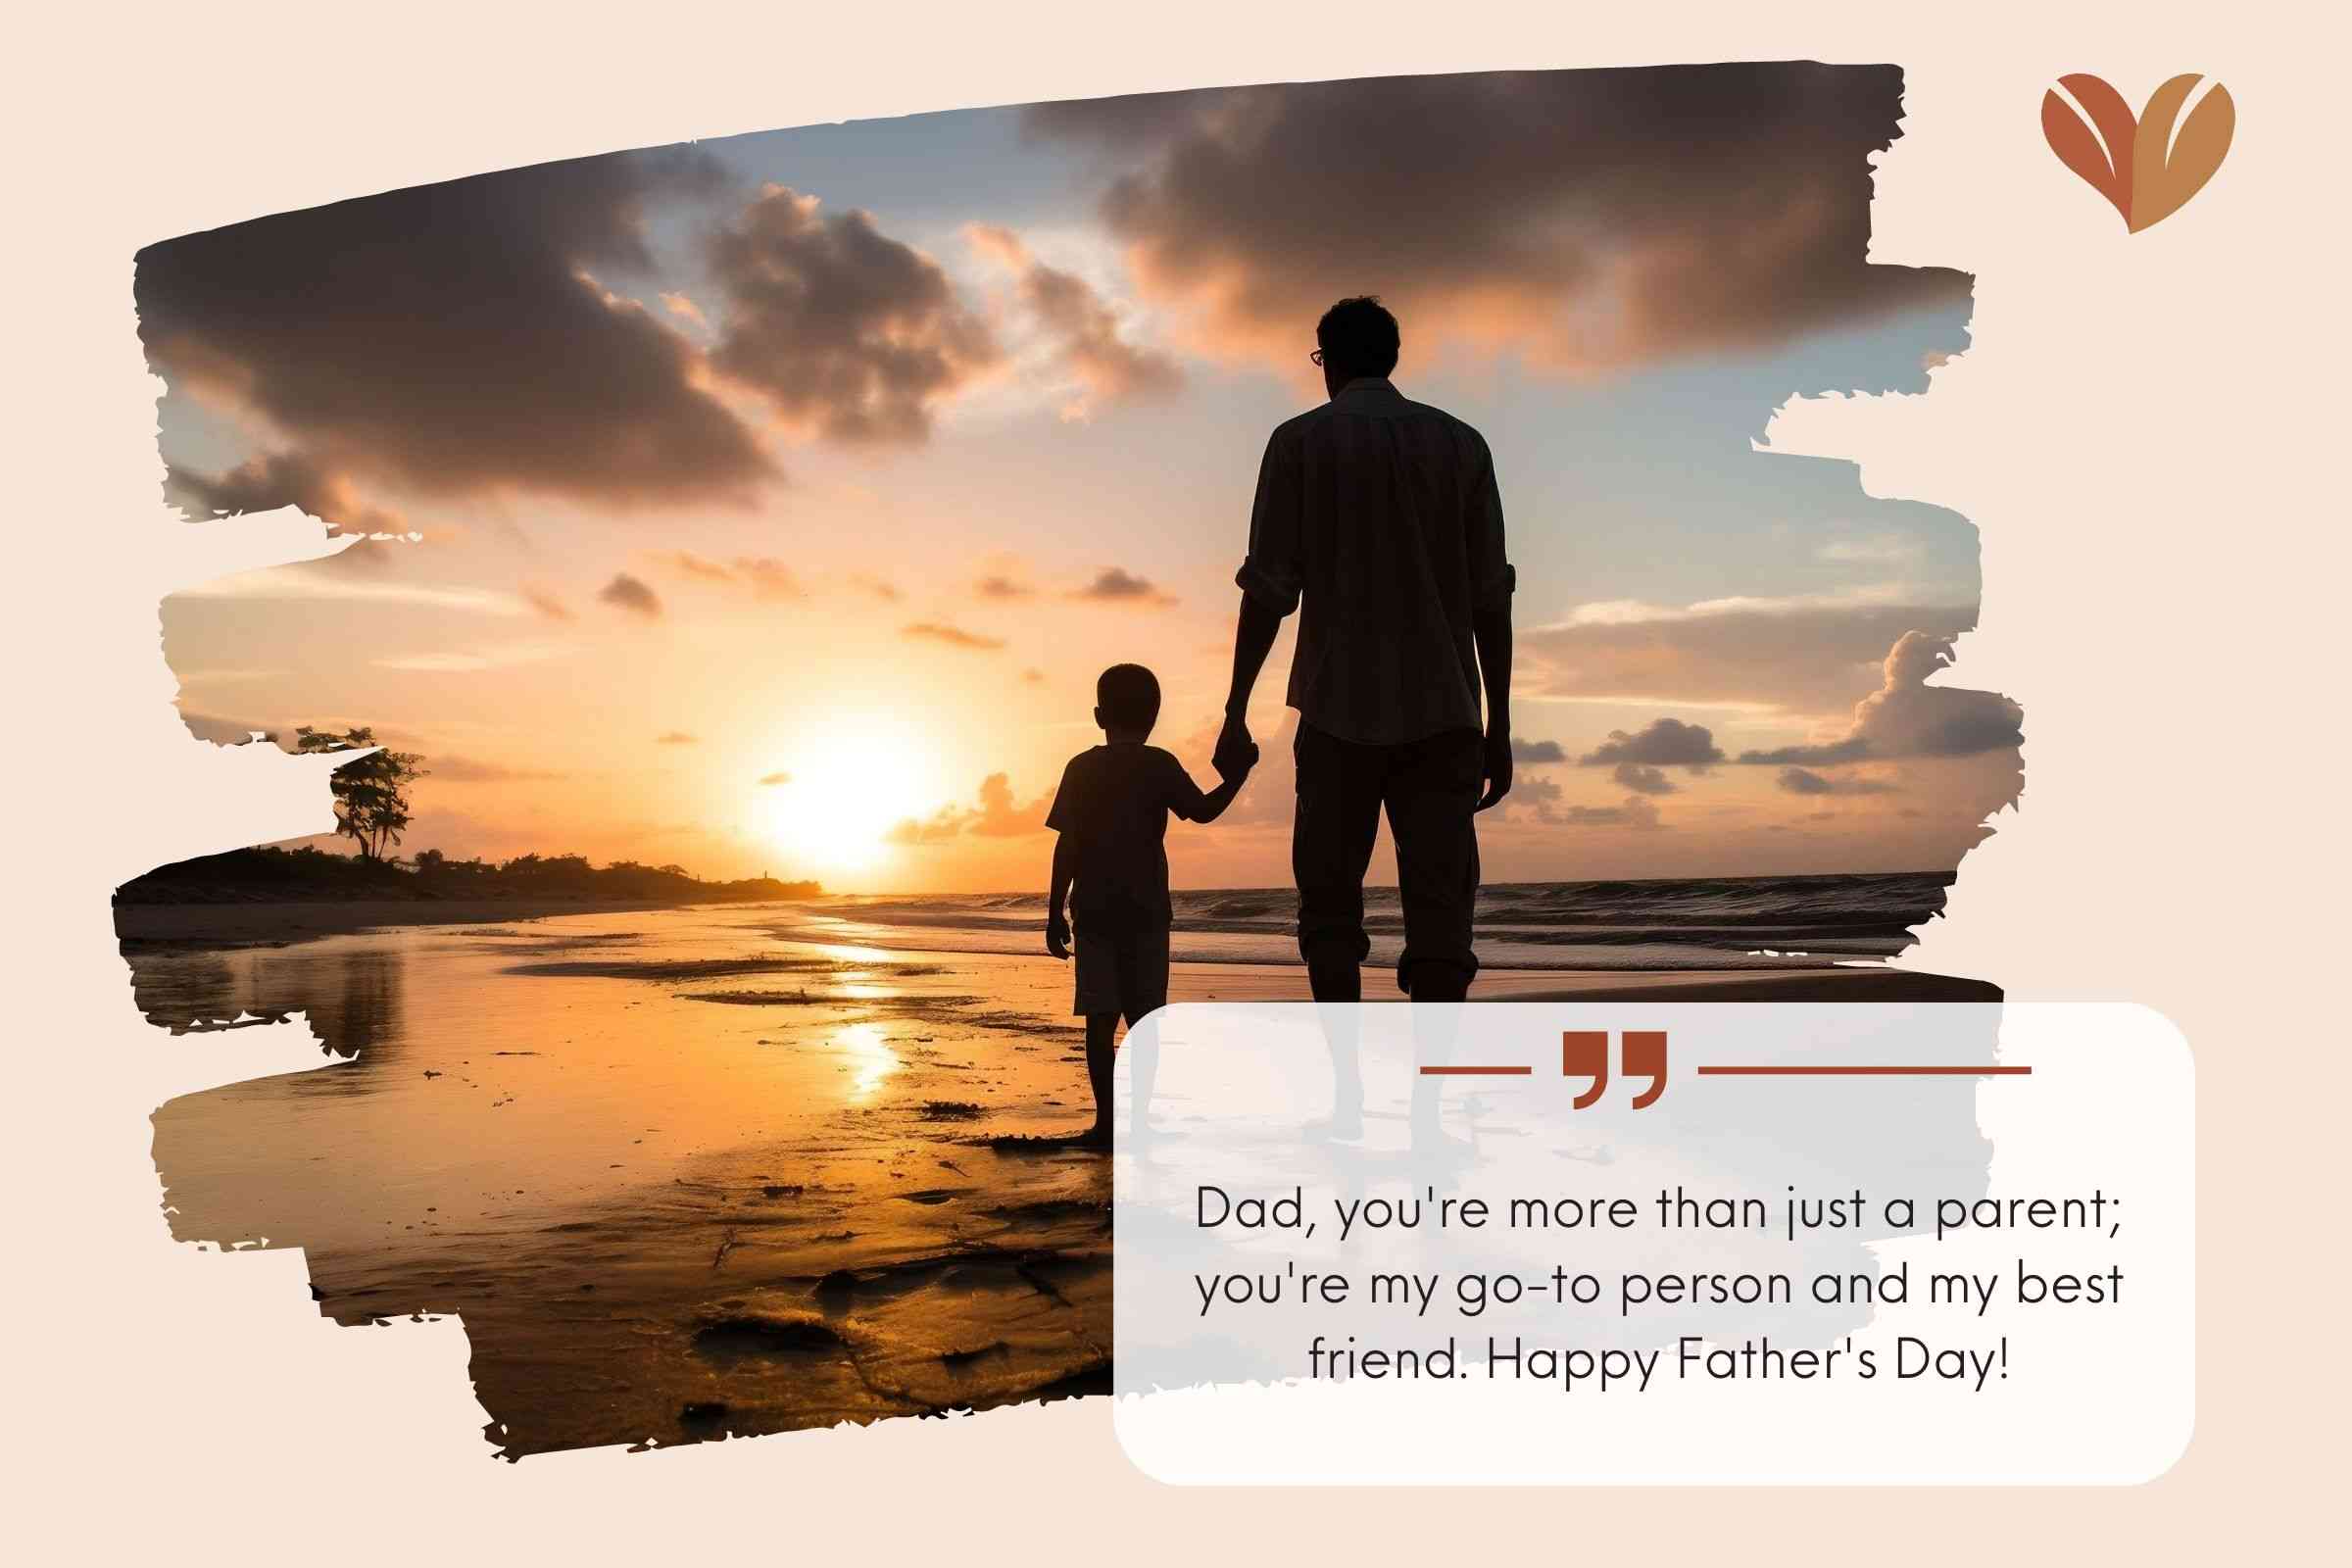 Heartfelt Father's Day Messages for Dad to Show Appreciation